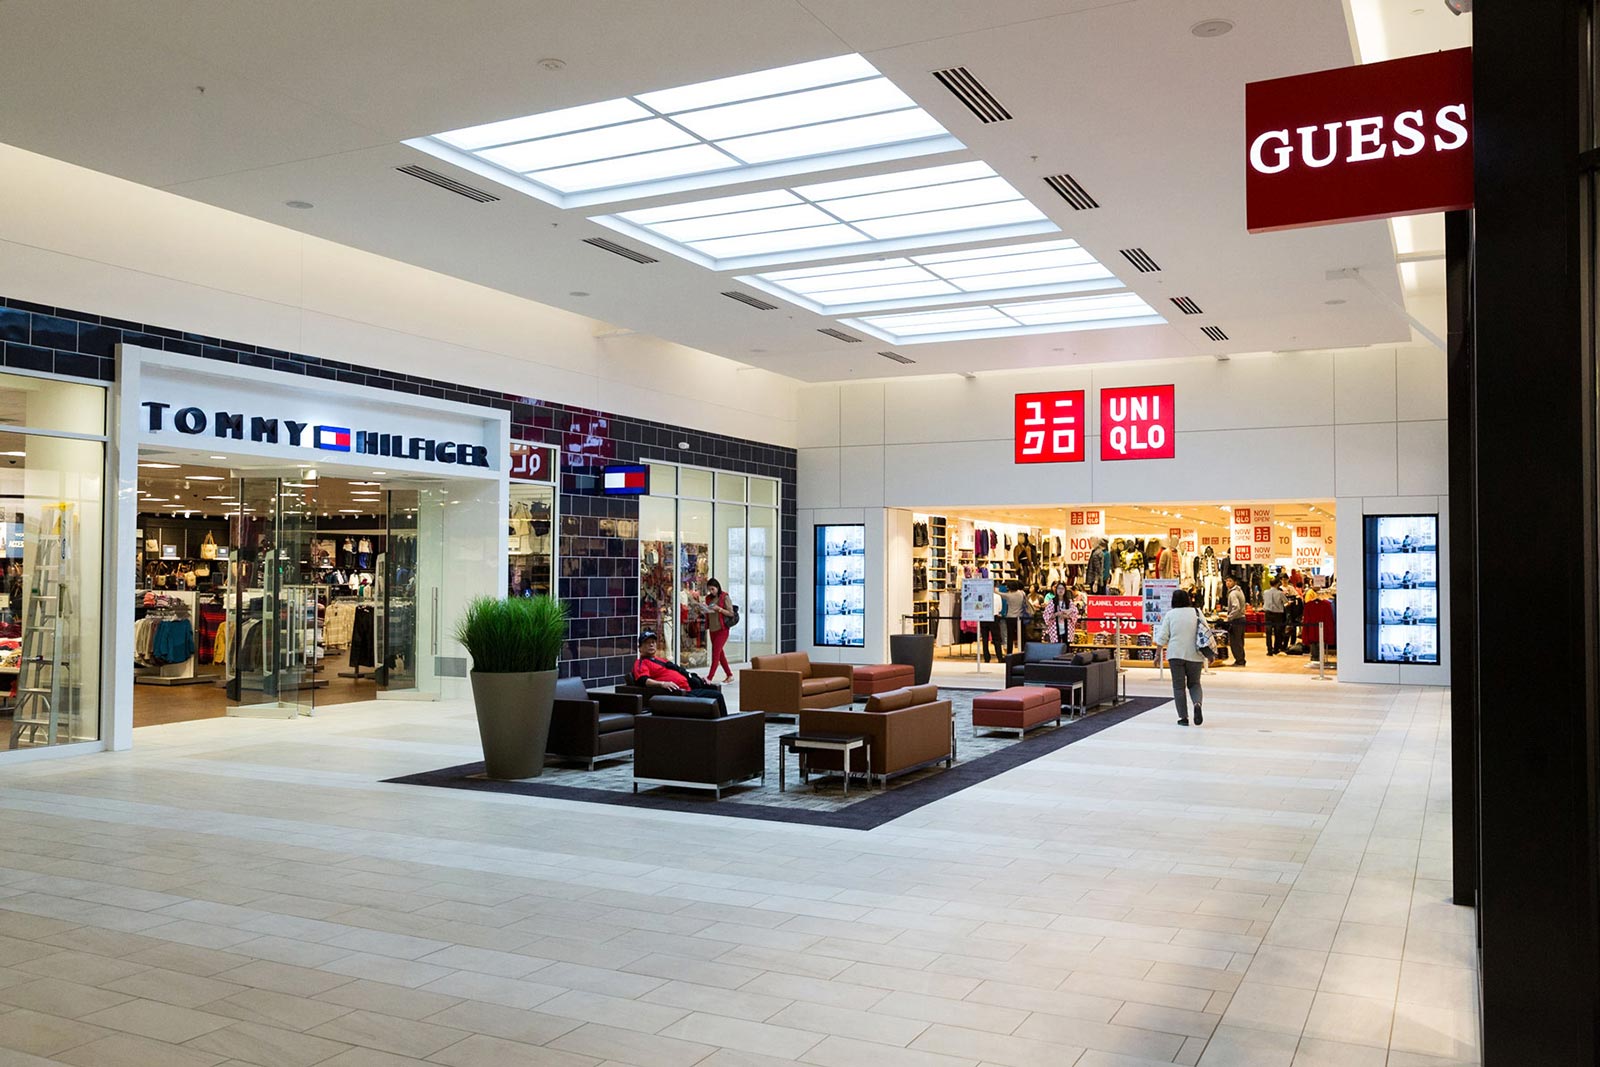 Gallery - Retail - Great Mall | Cooledge Lighting